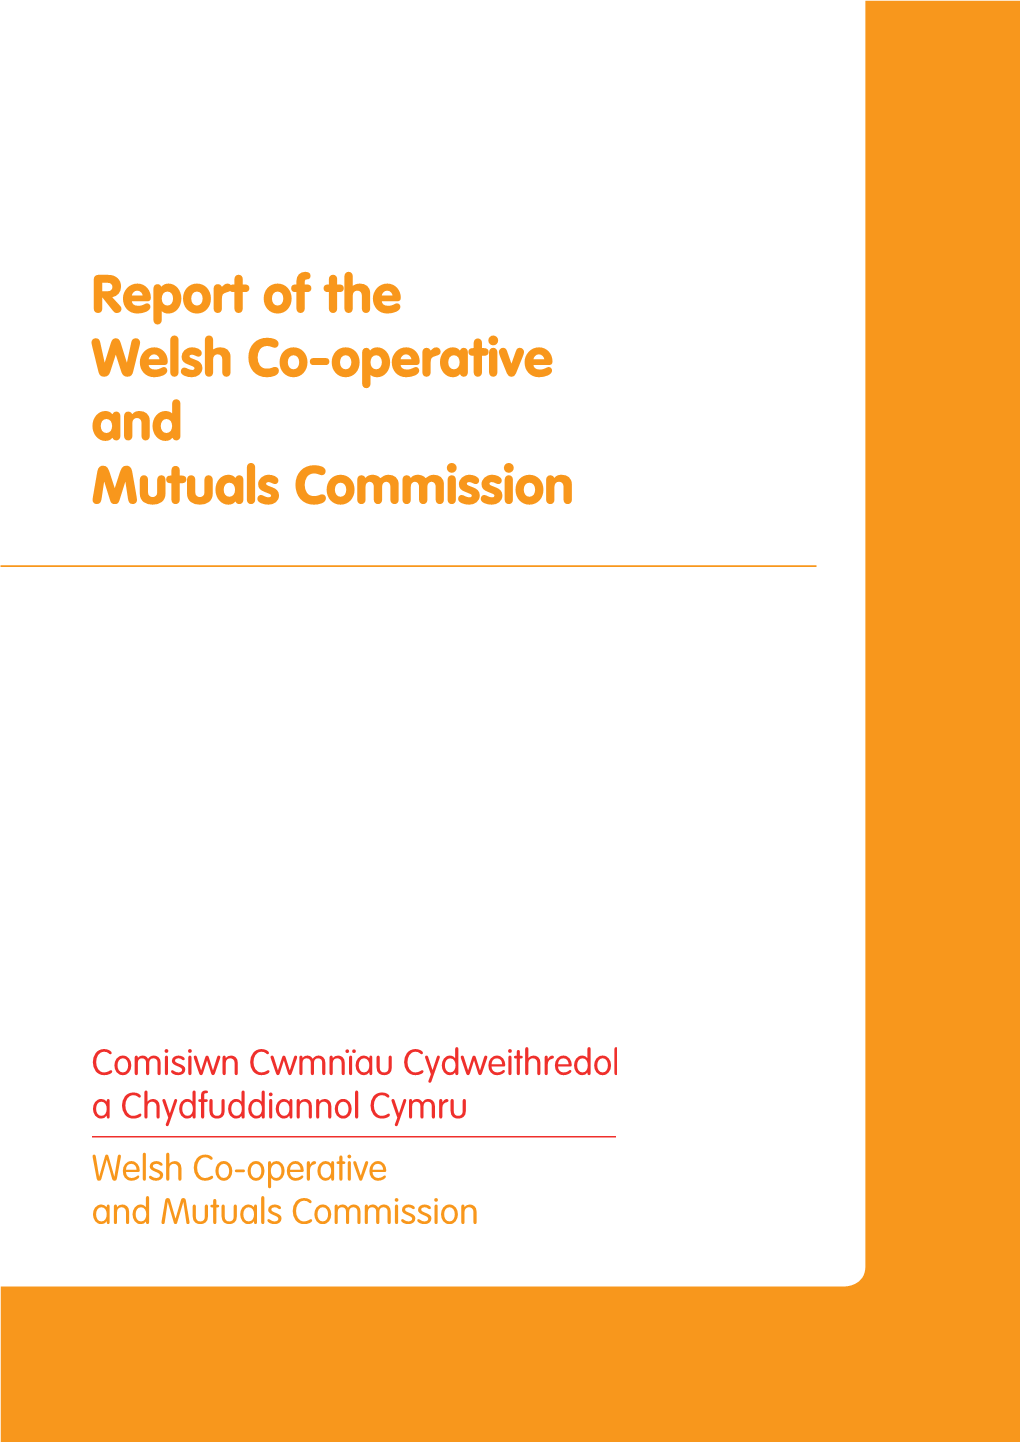 Report of the Welsh Co-Operative and Mutuals Commission Digital ISBN 978 1 4734 0986 6 Contents